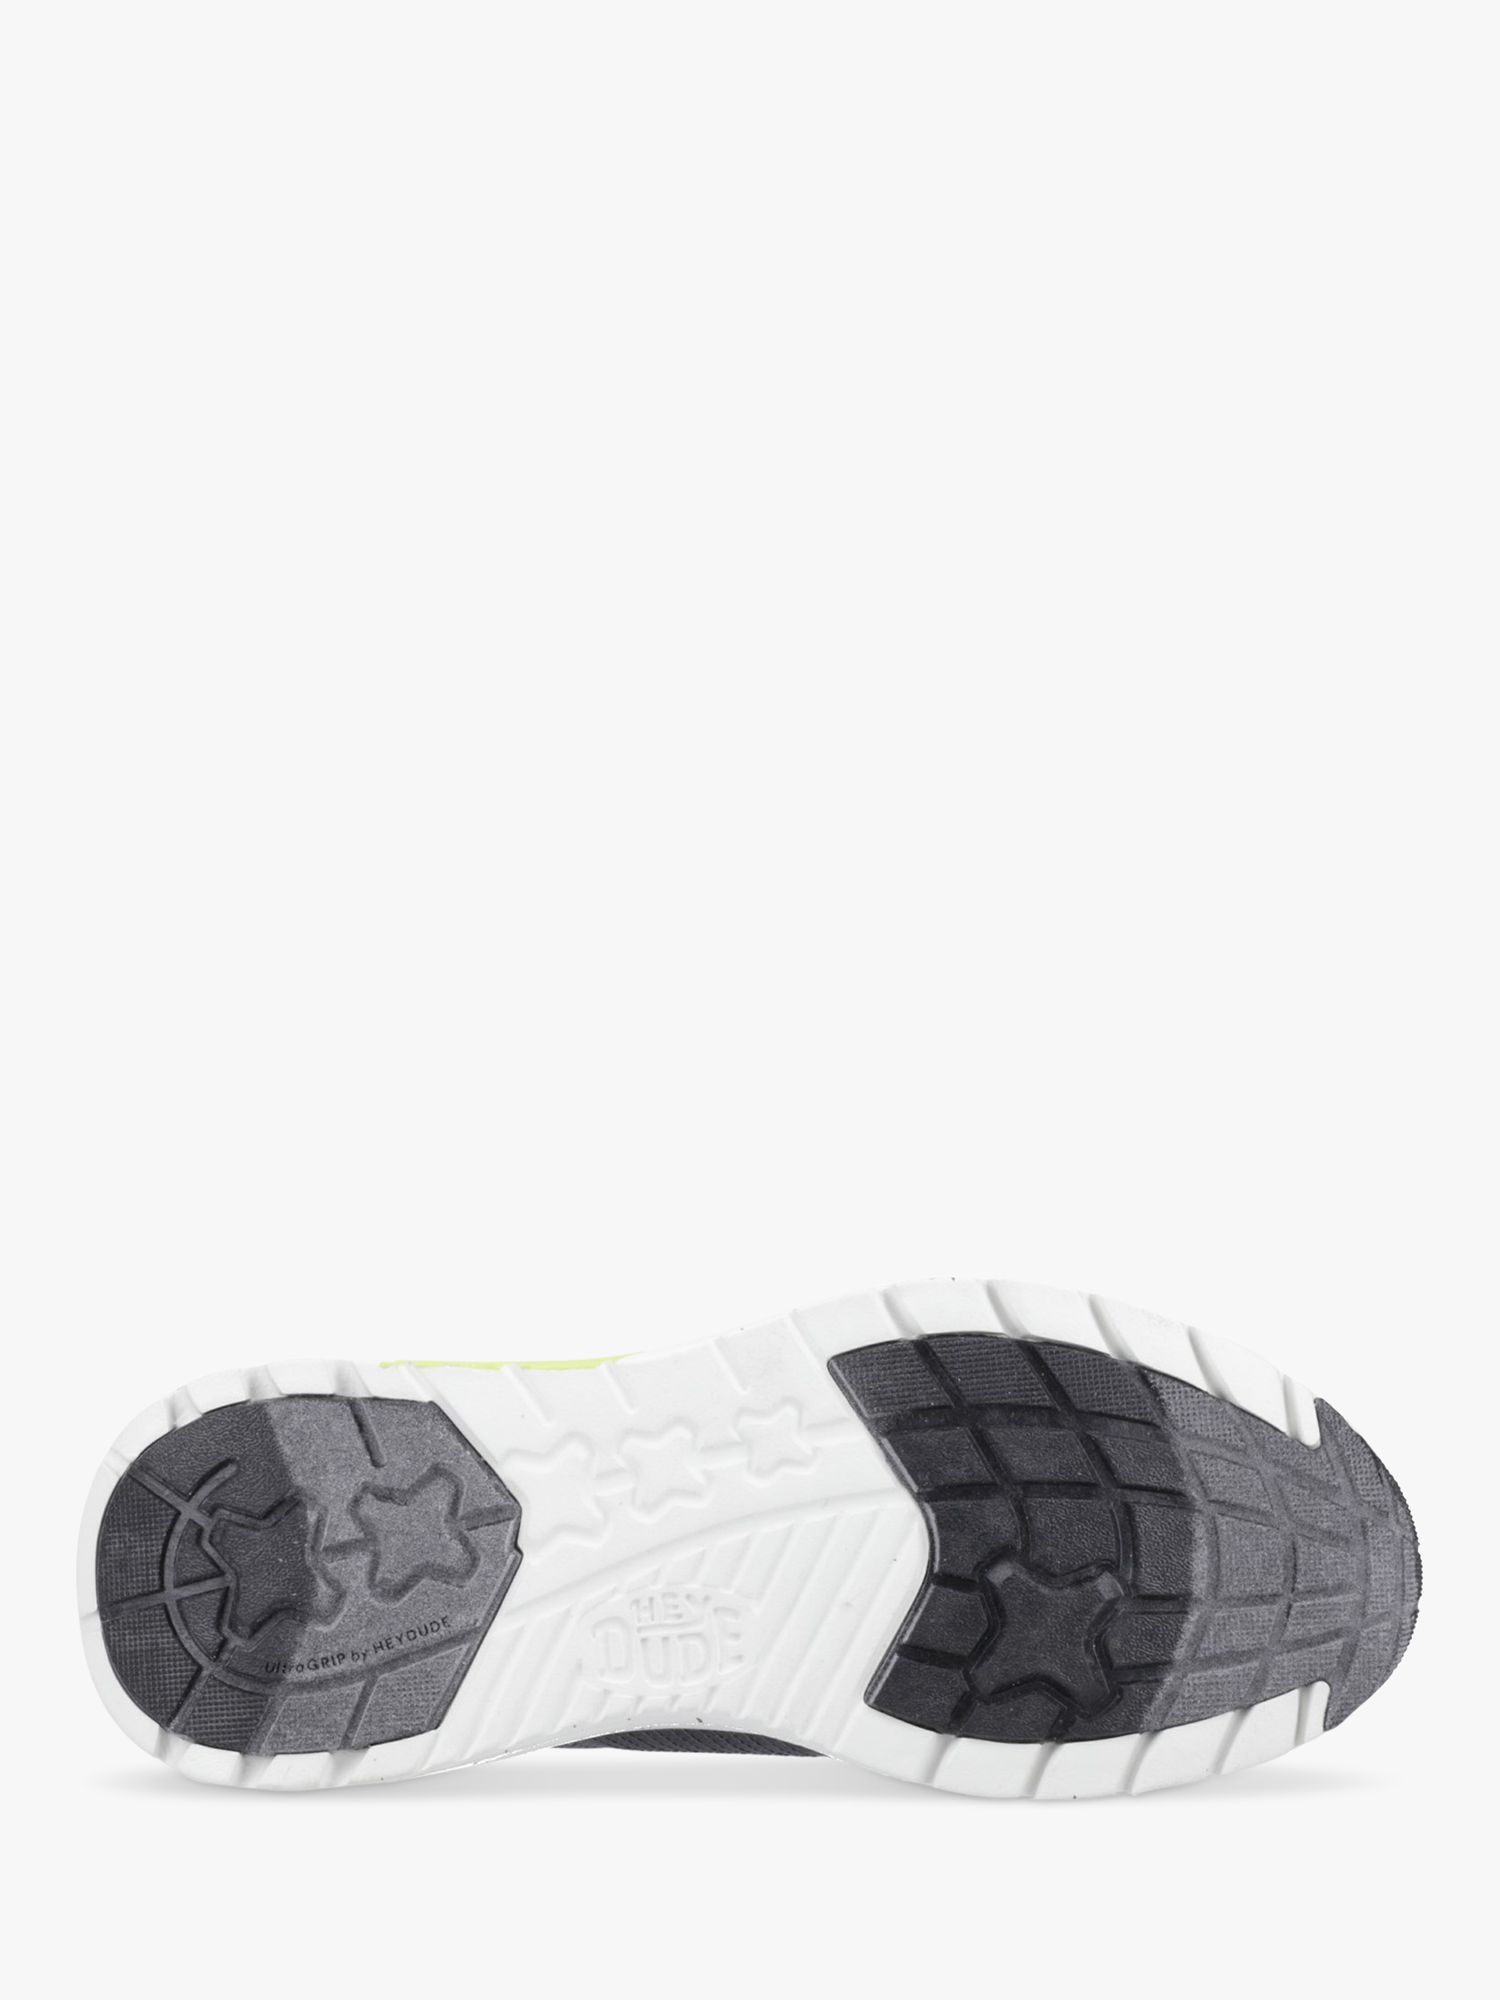 Buy Hey Dude Sirocco Sport Mode Trainers, Grey Online at johnlewis.com